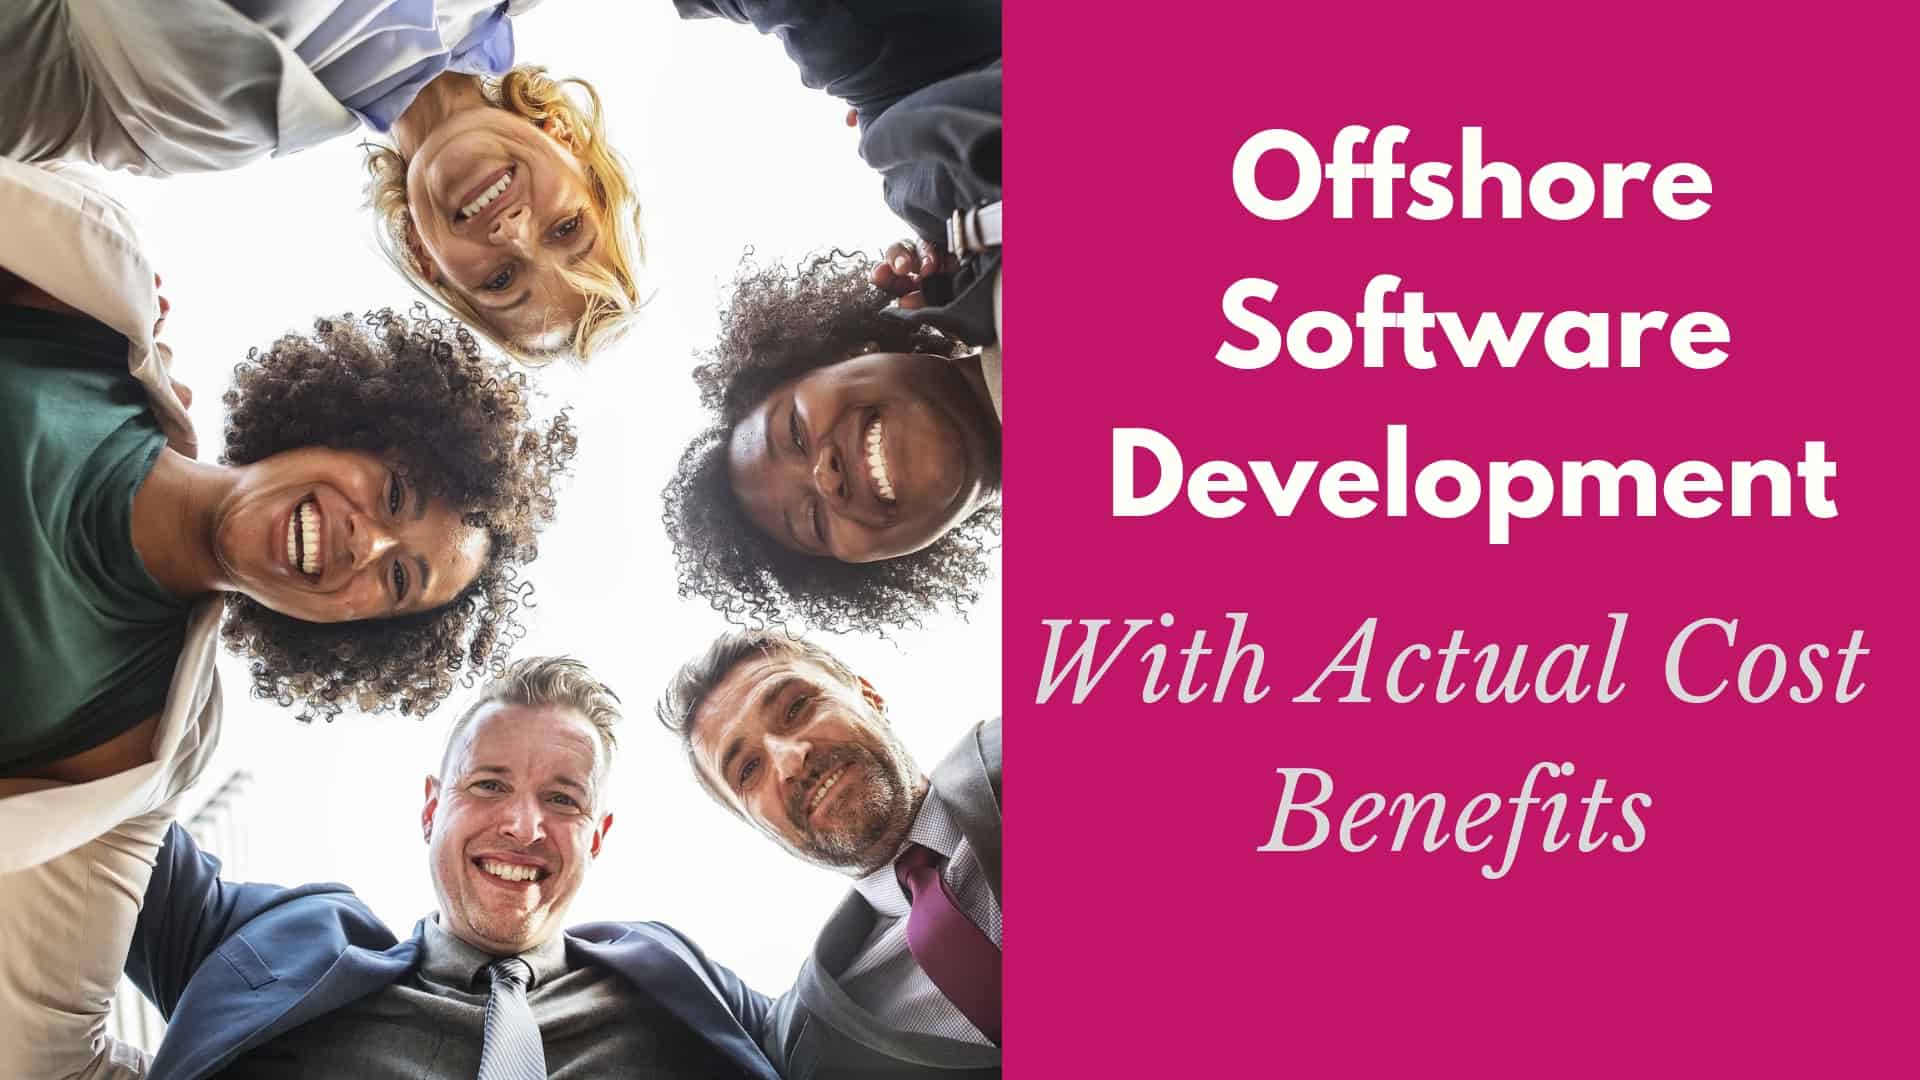 Offshore Software Development With Actual Cost Benefits